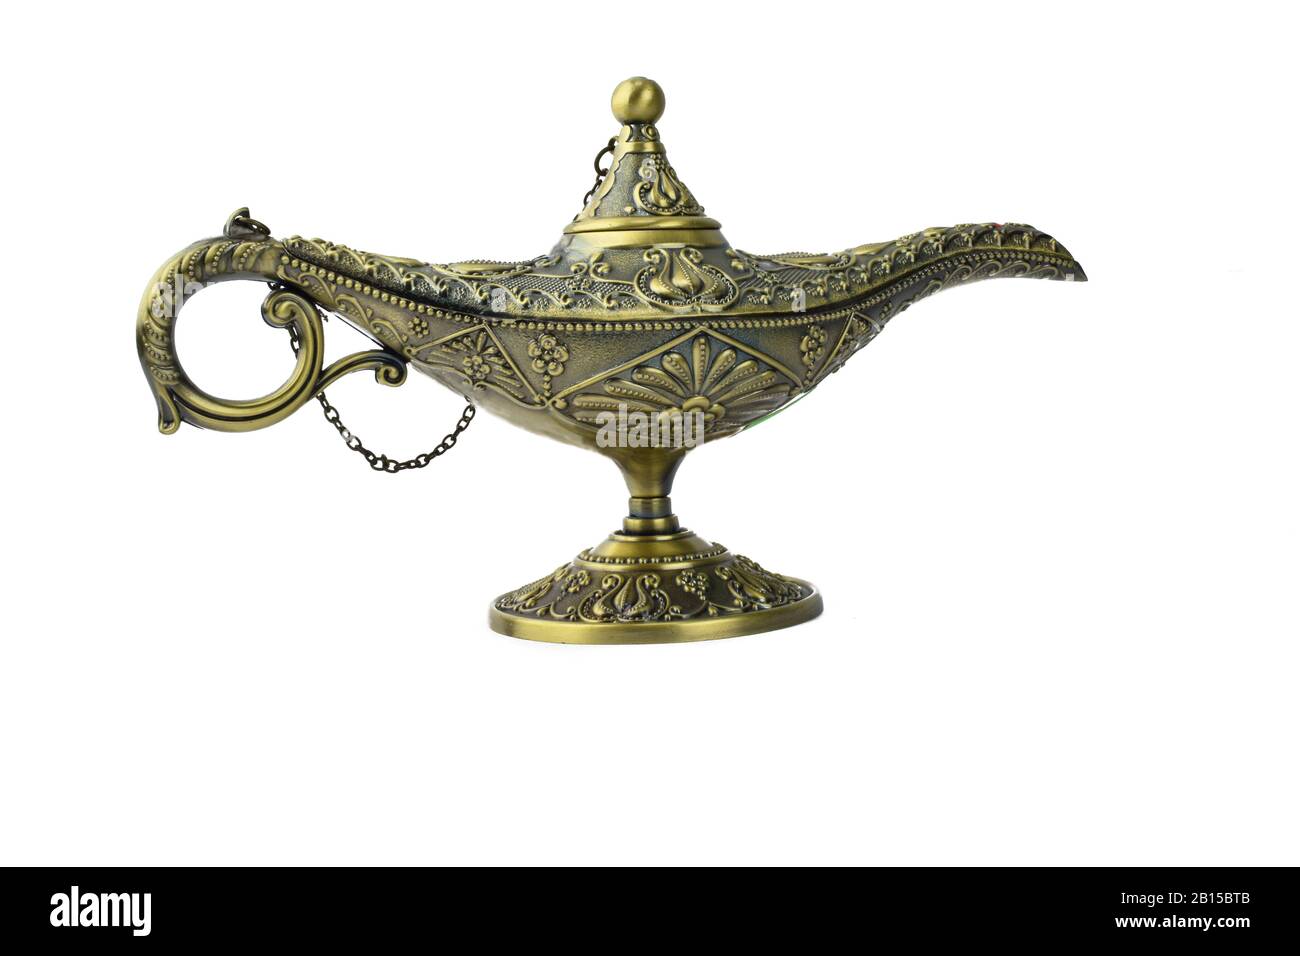 https://c8.alamy.com/comp/2B15BTB/golden-colored-antique-oil-lamp-with-rust-displayed-over-an-isolated-white-background-2B15BTB.jpg